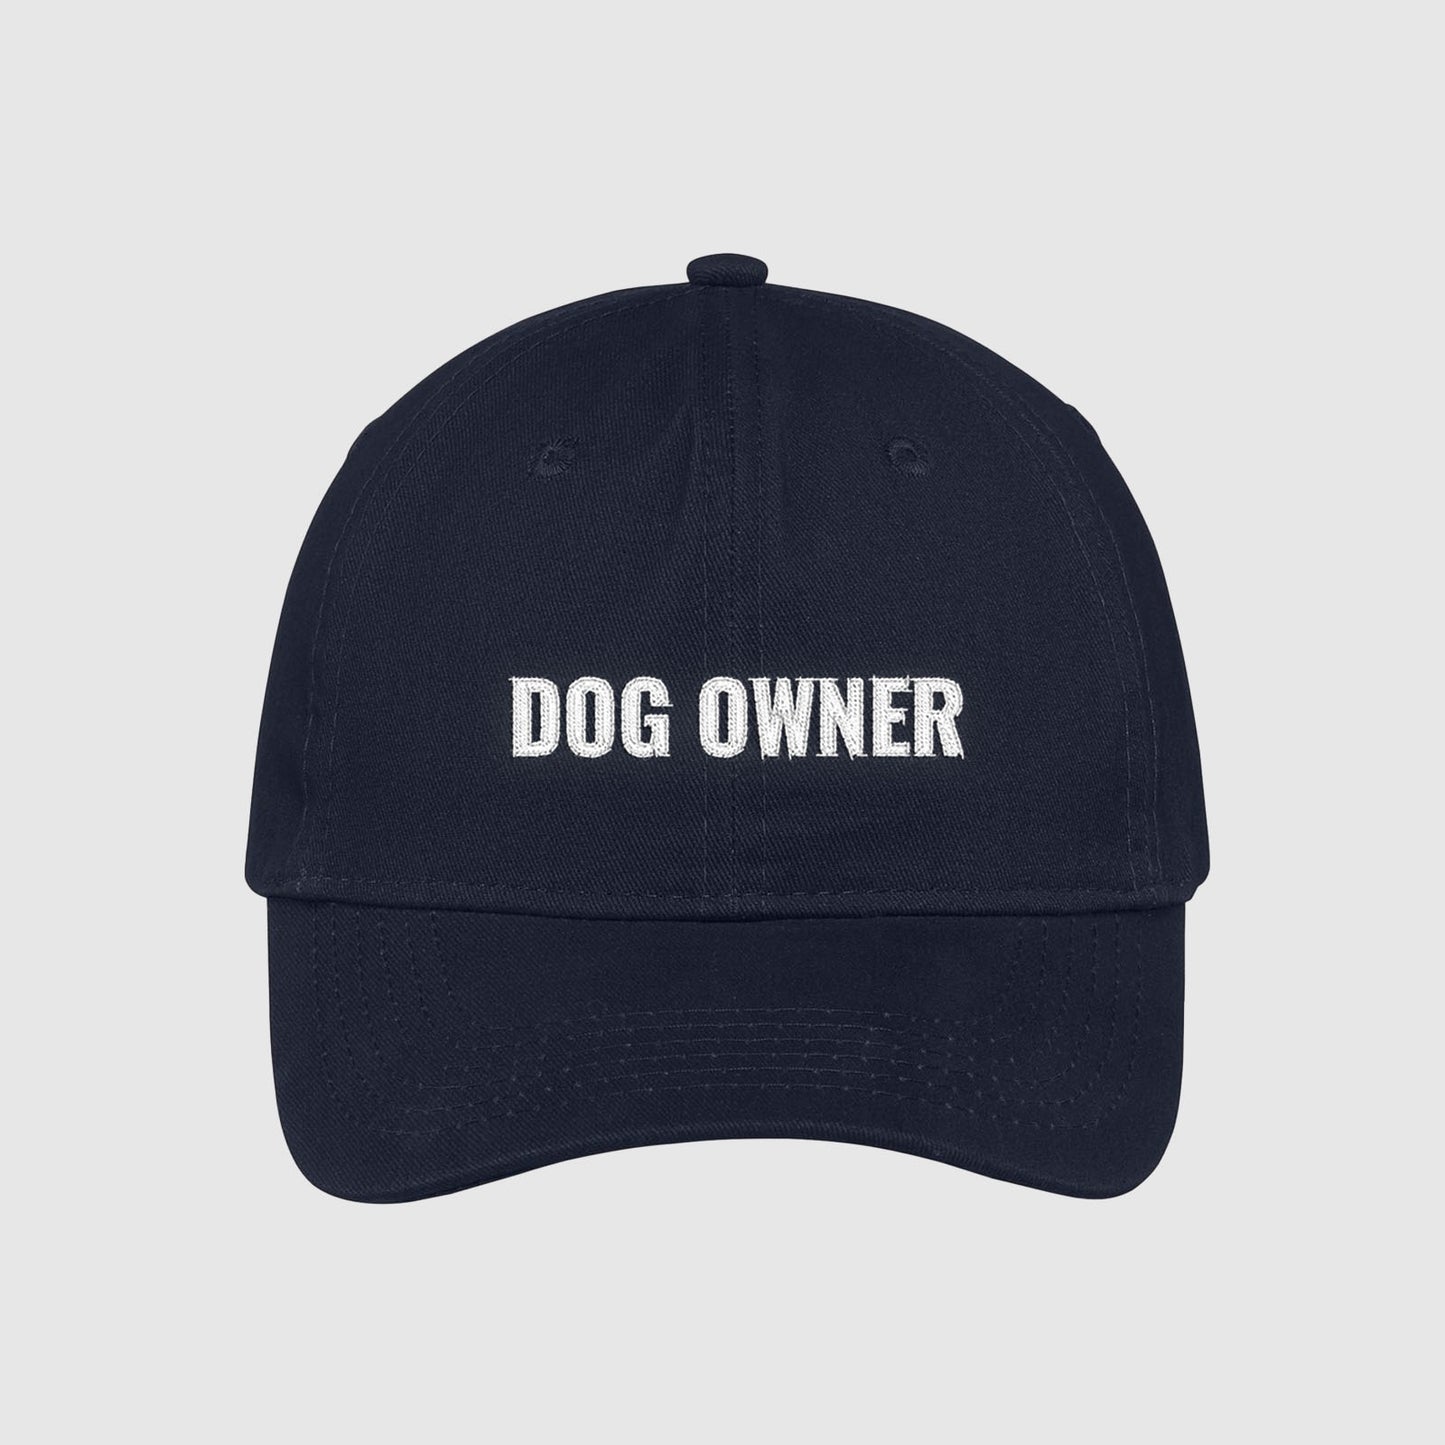 Navy dad hat with Dog Owner embroidered on the front with white thread.